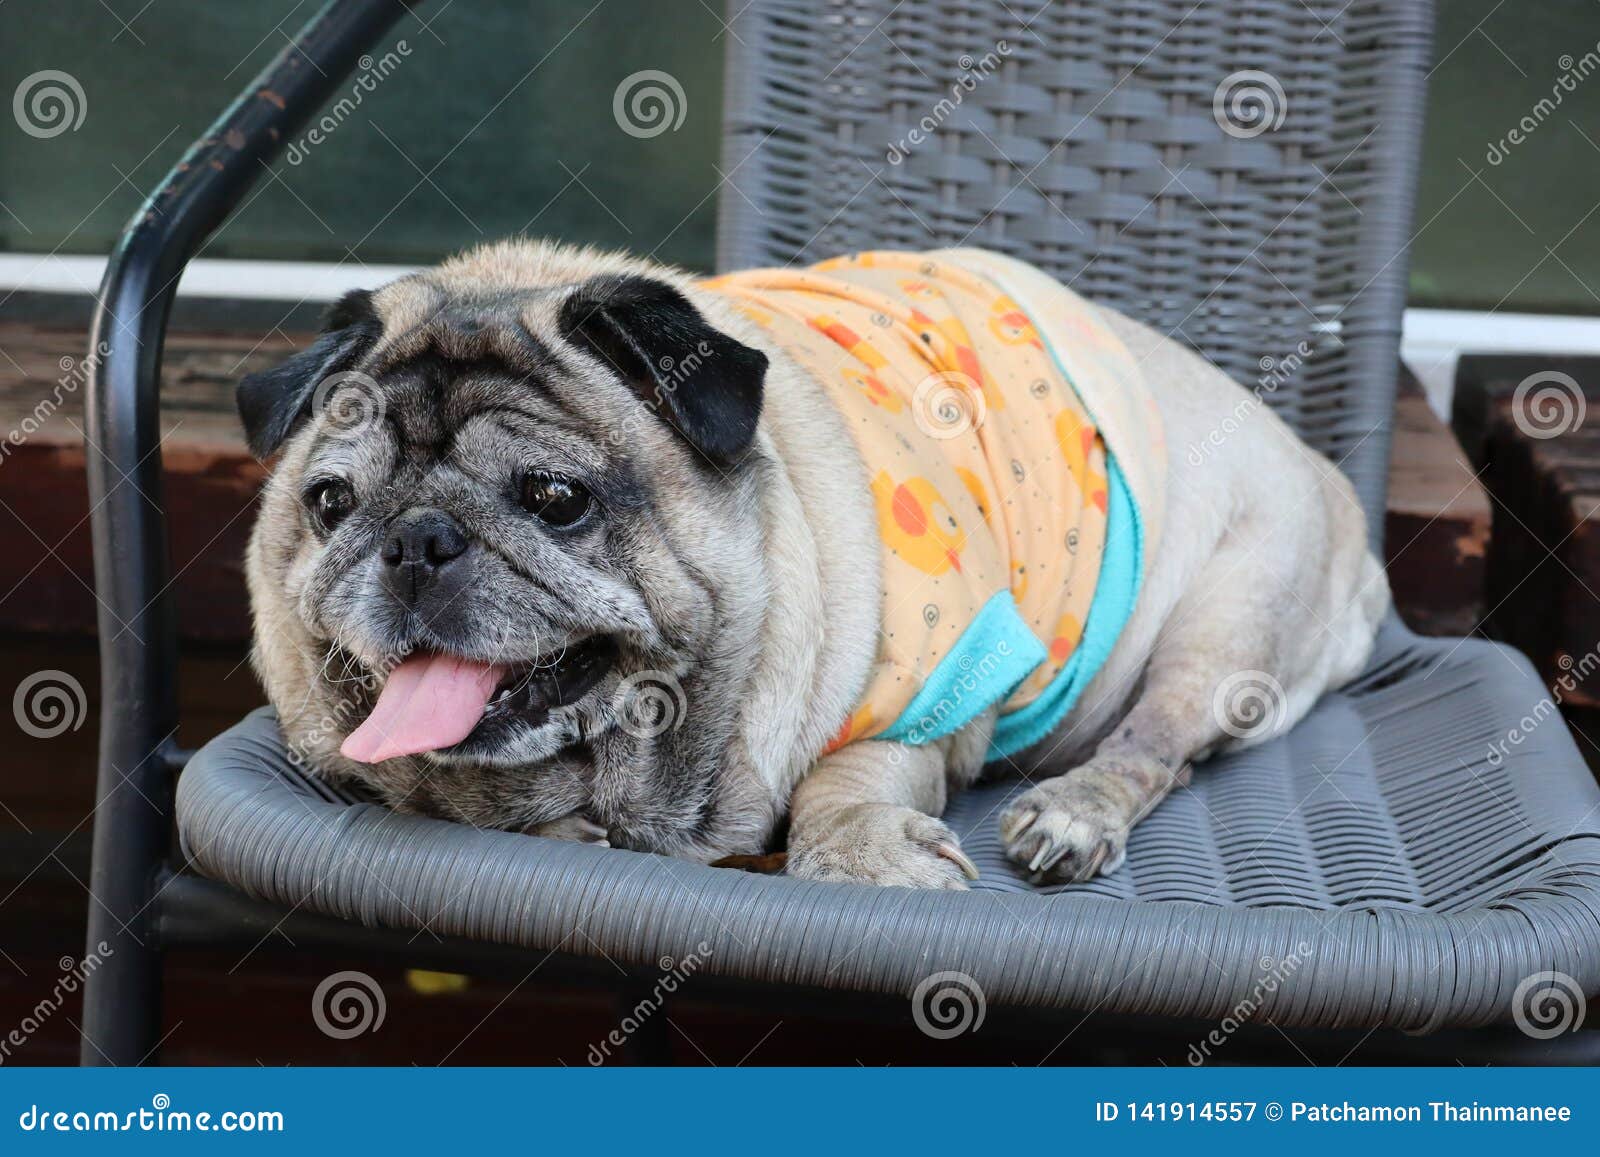 Cute Fat Pug Dog Sitting On A Chair Happy Smile Stock Image